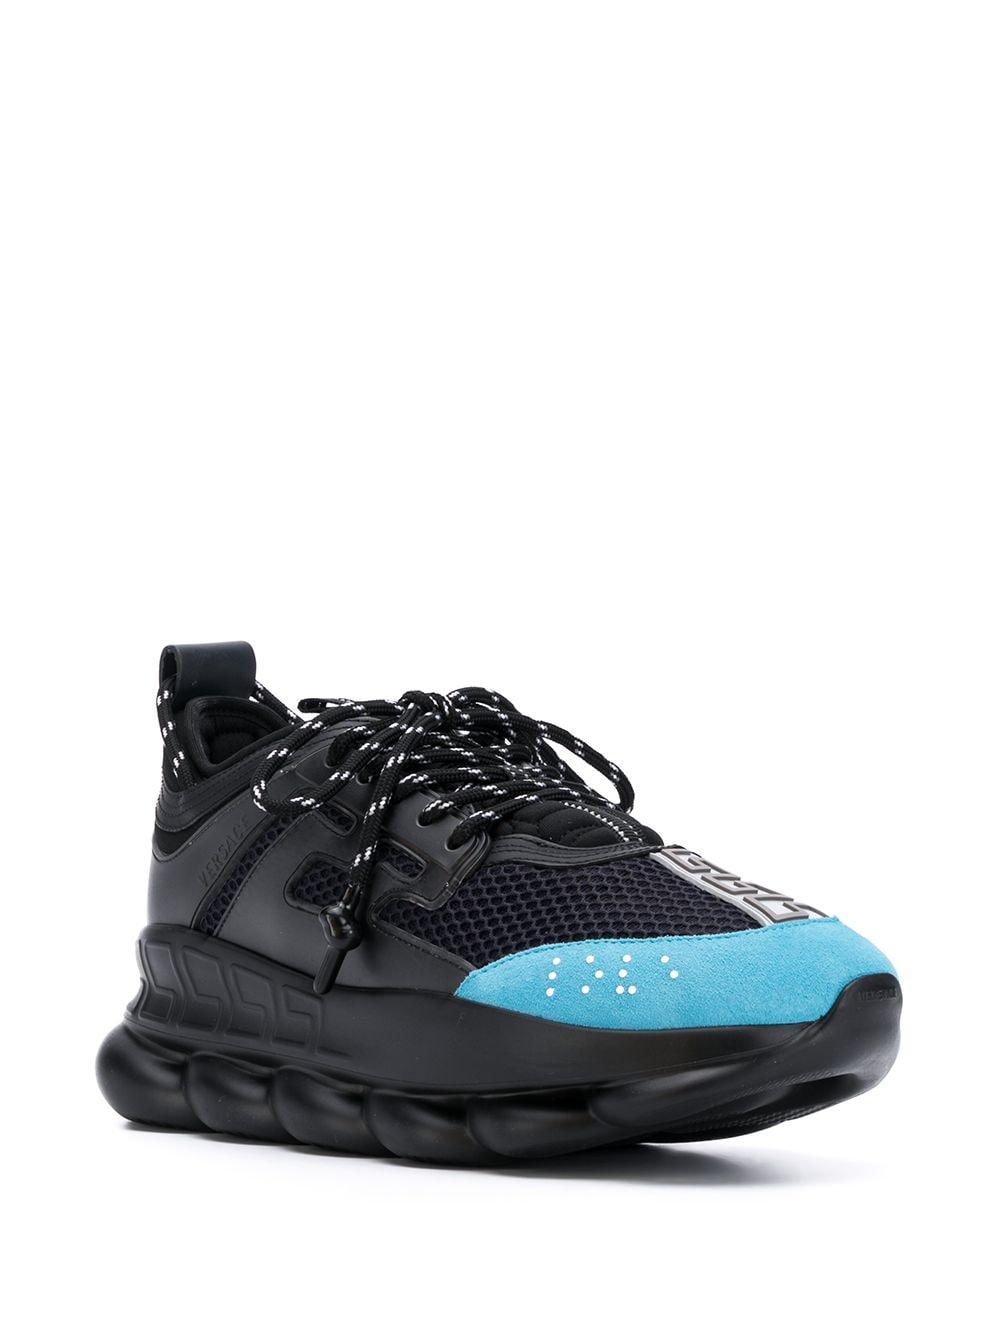 Versace Chunky Lace-up Sneakers in Black (Blue) for Men - Lyst